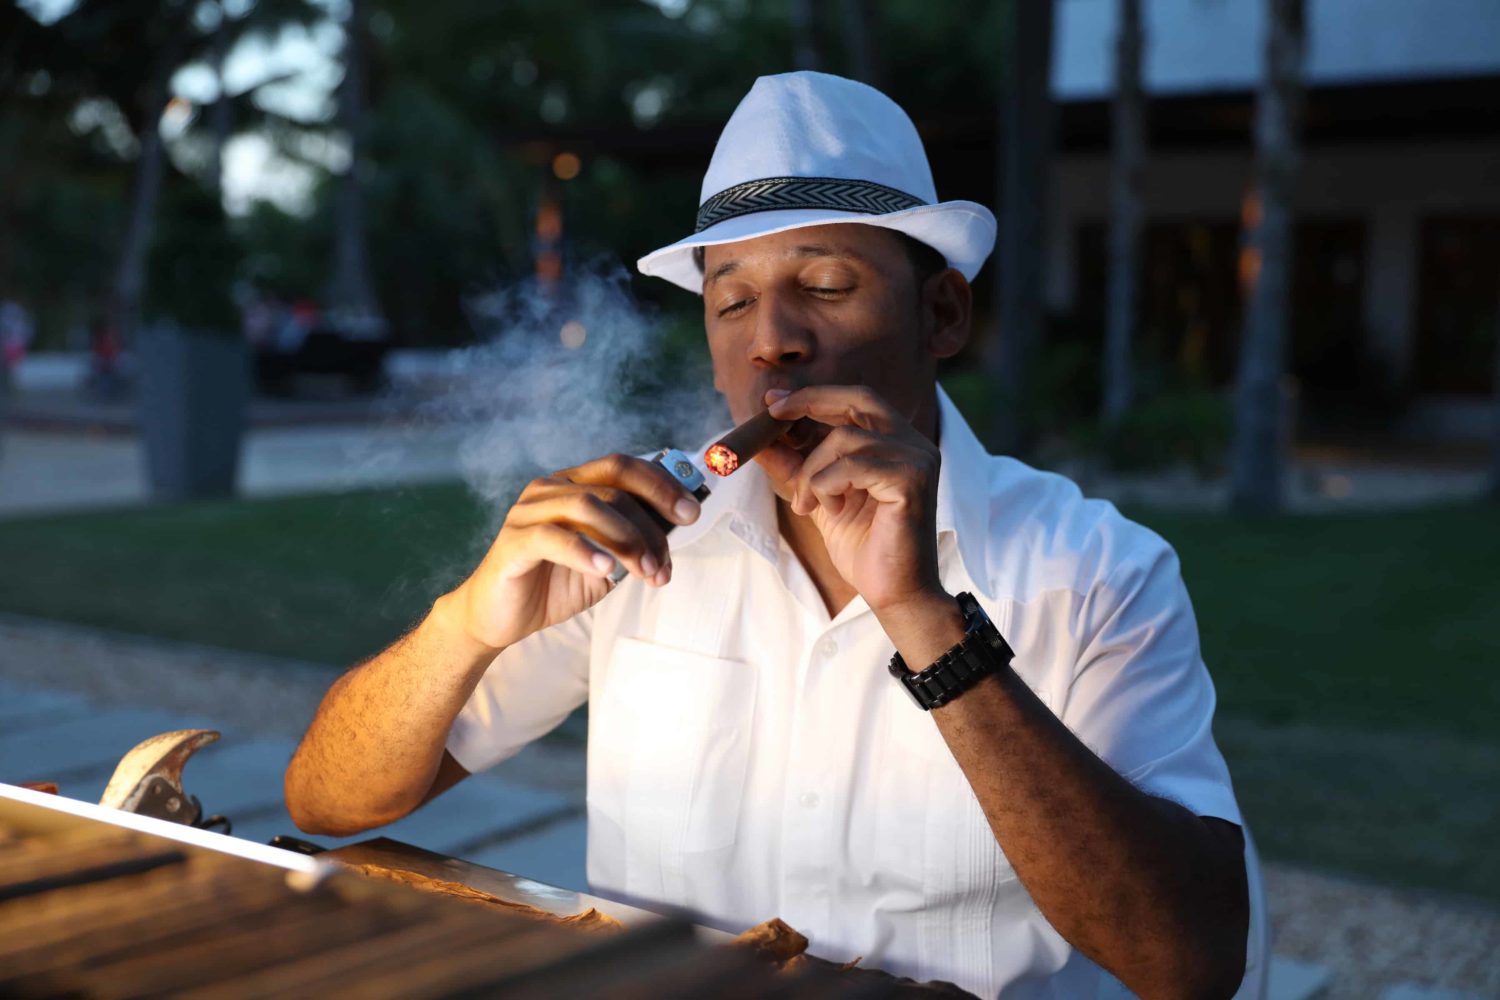 Experience the fine art of cigar-making first hand at the most prestigious cigar factory in the Dominican Republic